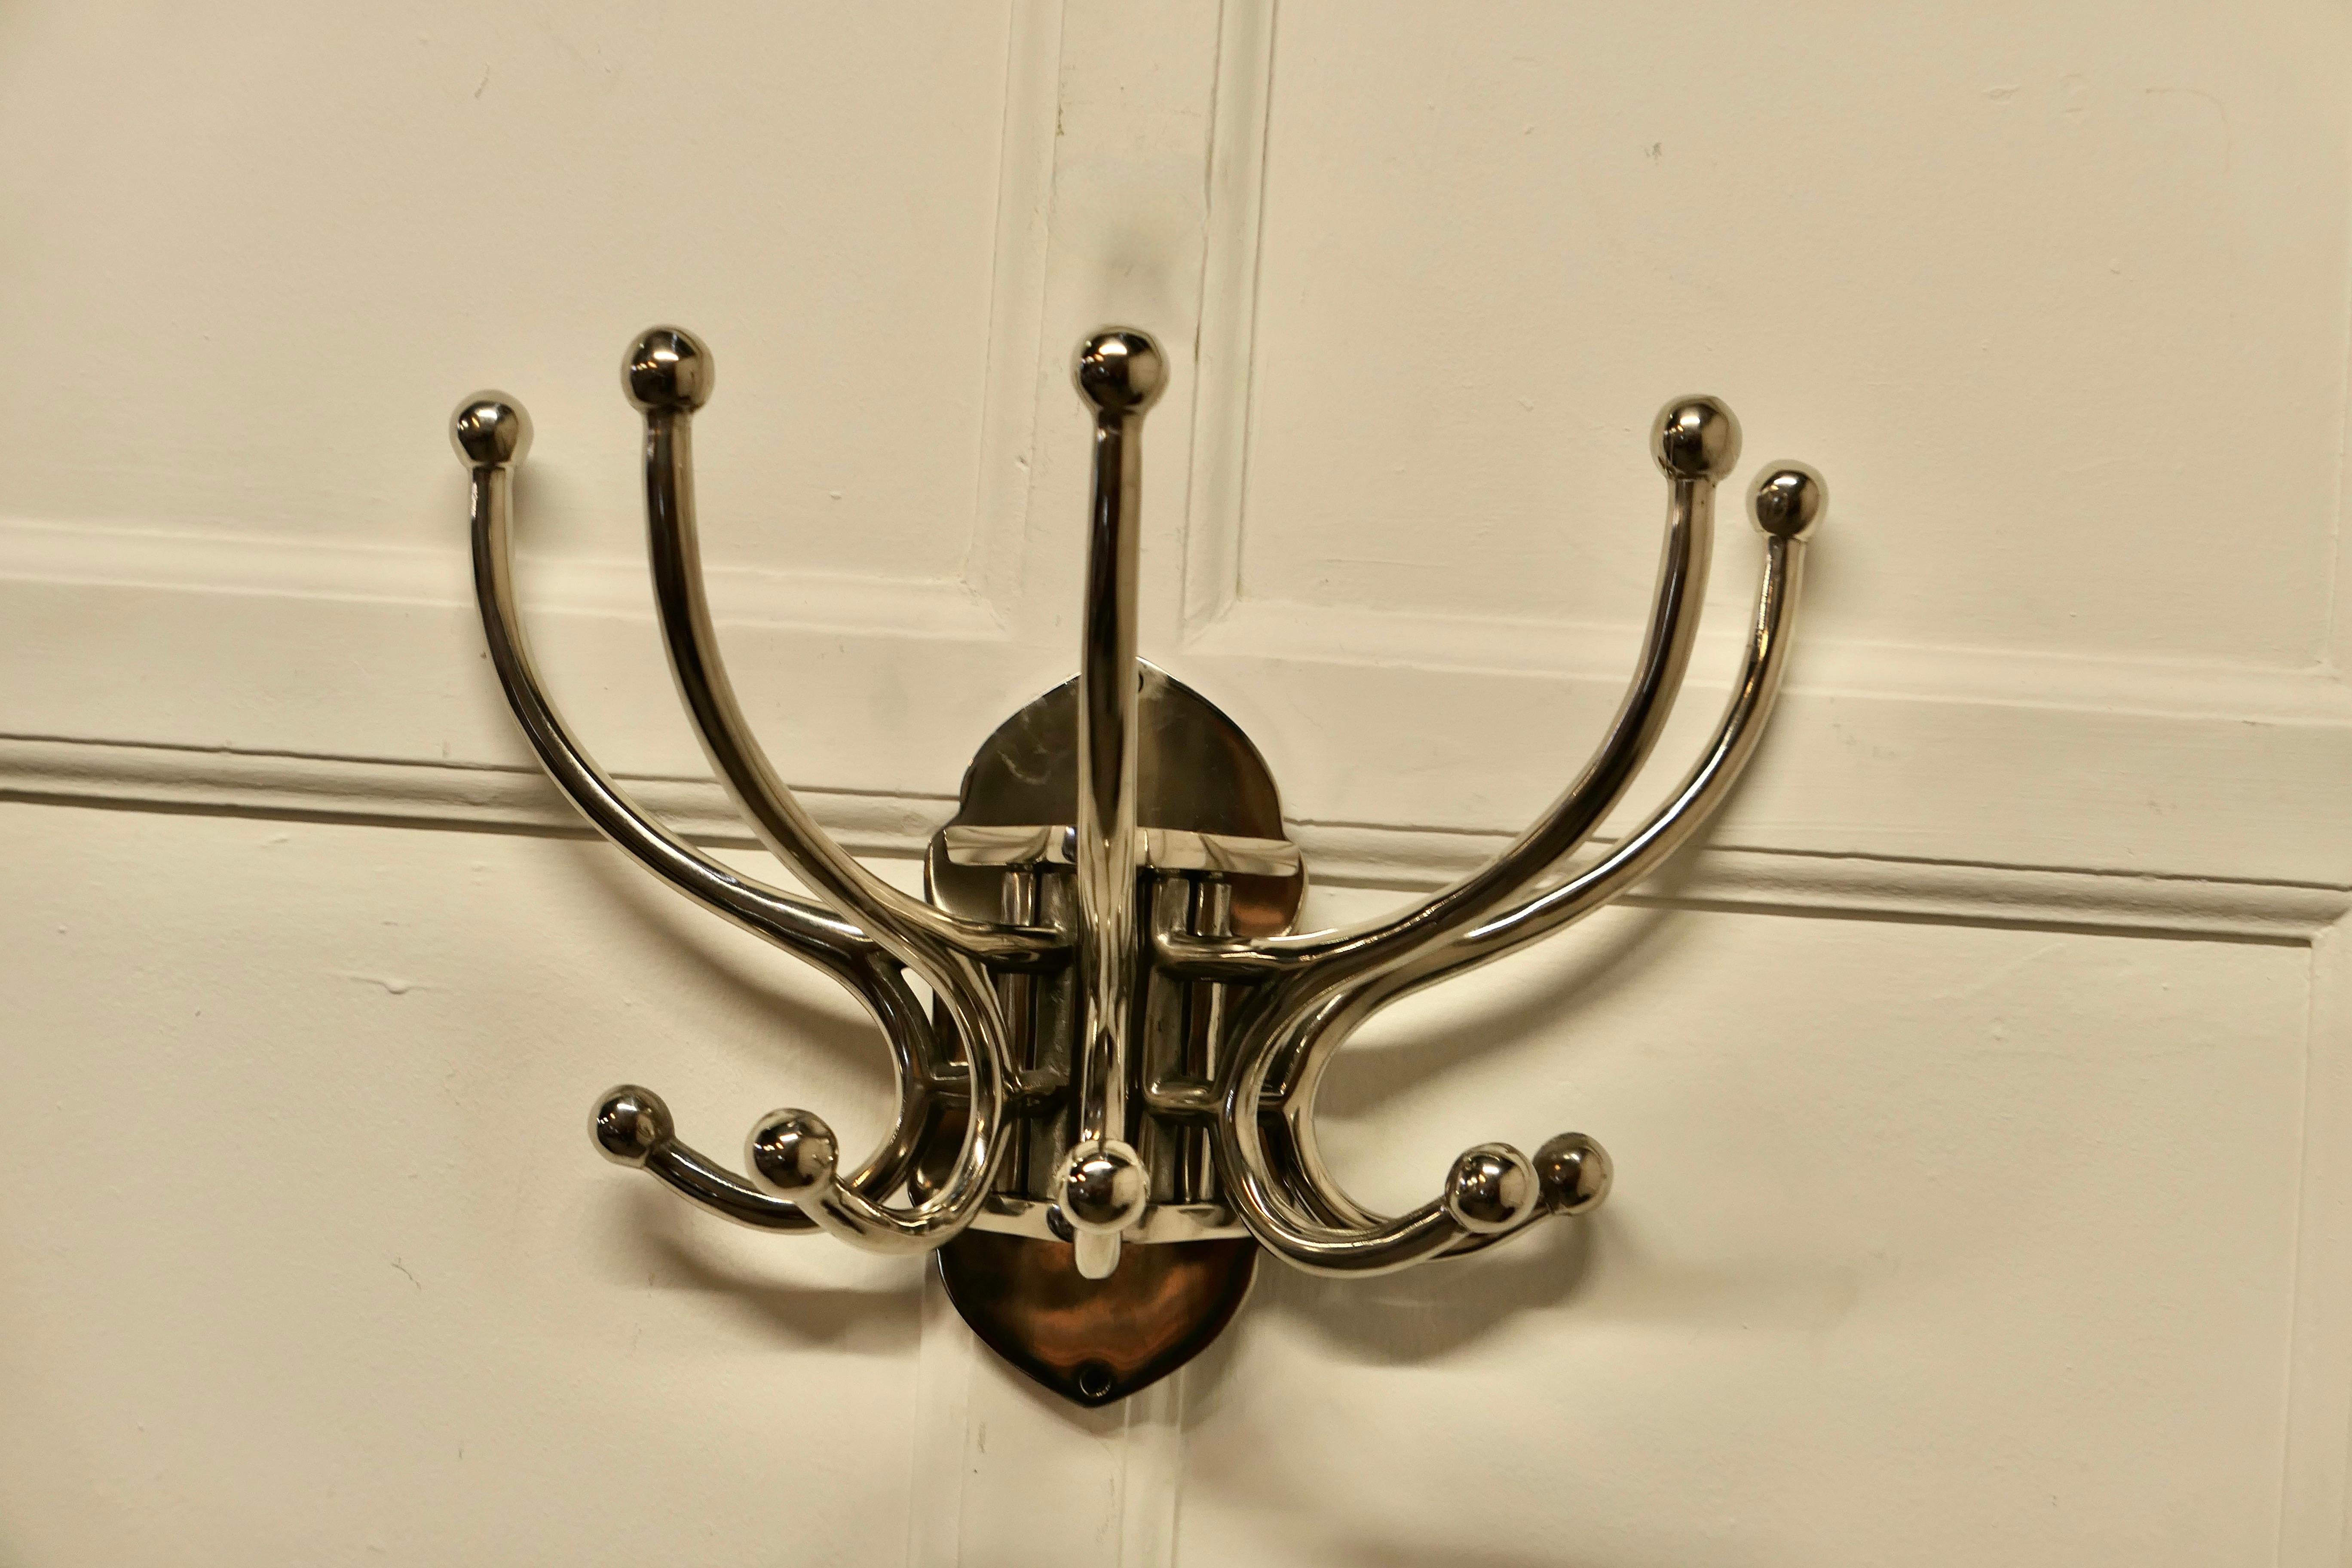 Art Deco style french chrome coat rack, hat and coat hooks

Very stylish chrome Cloakroom hanging bracket
The rack has 5 double swan neck hooks, these swing to the sides when required to fold flat
Strong and chunky a great idea
The bracket is